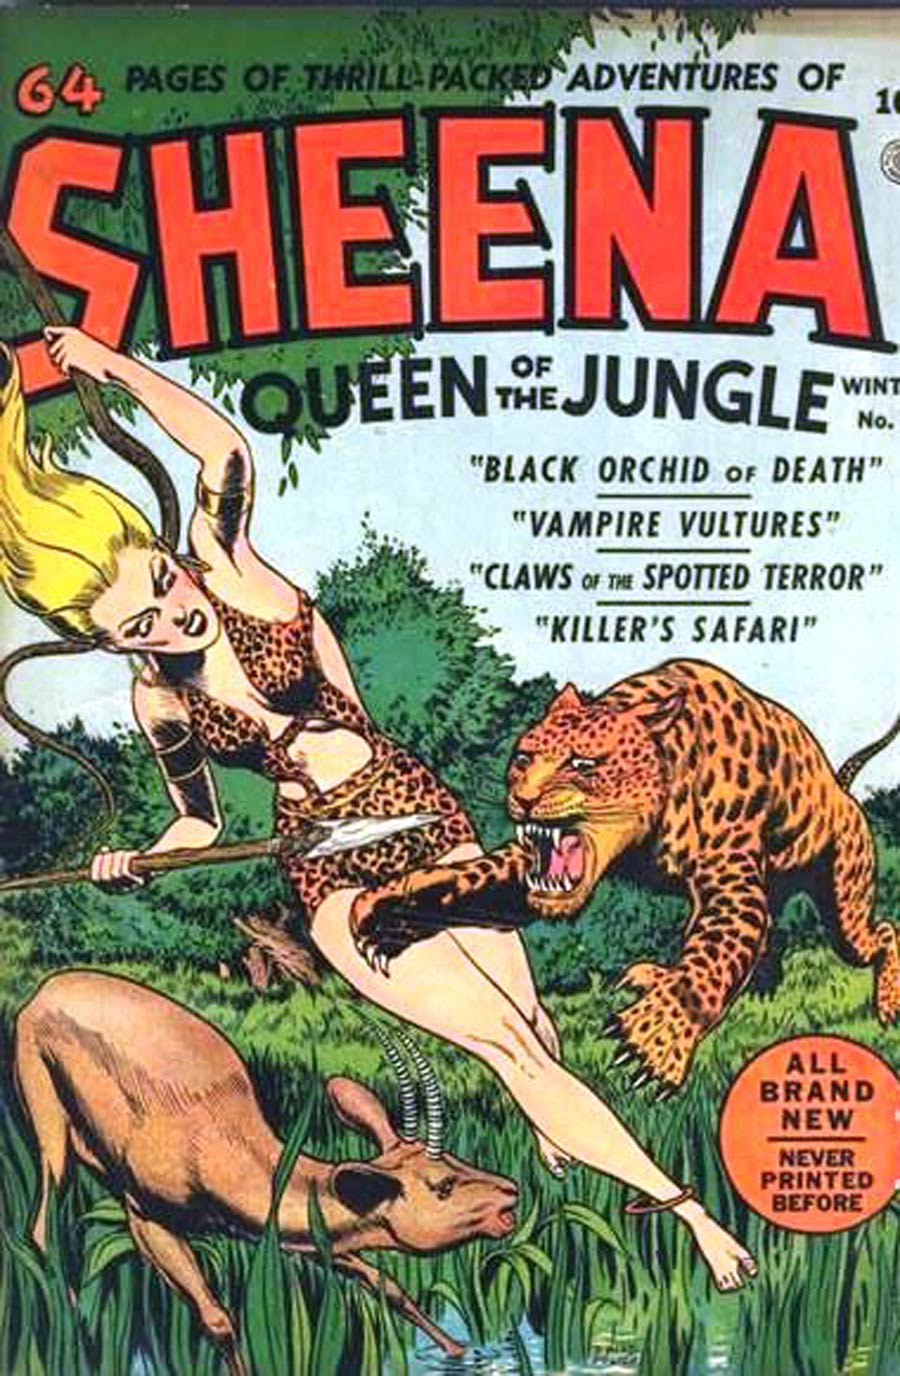 Sheena Queen Of The Jungle (Fiction House) #2